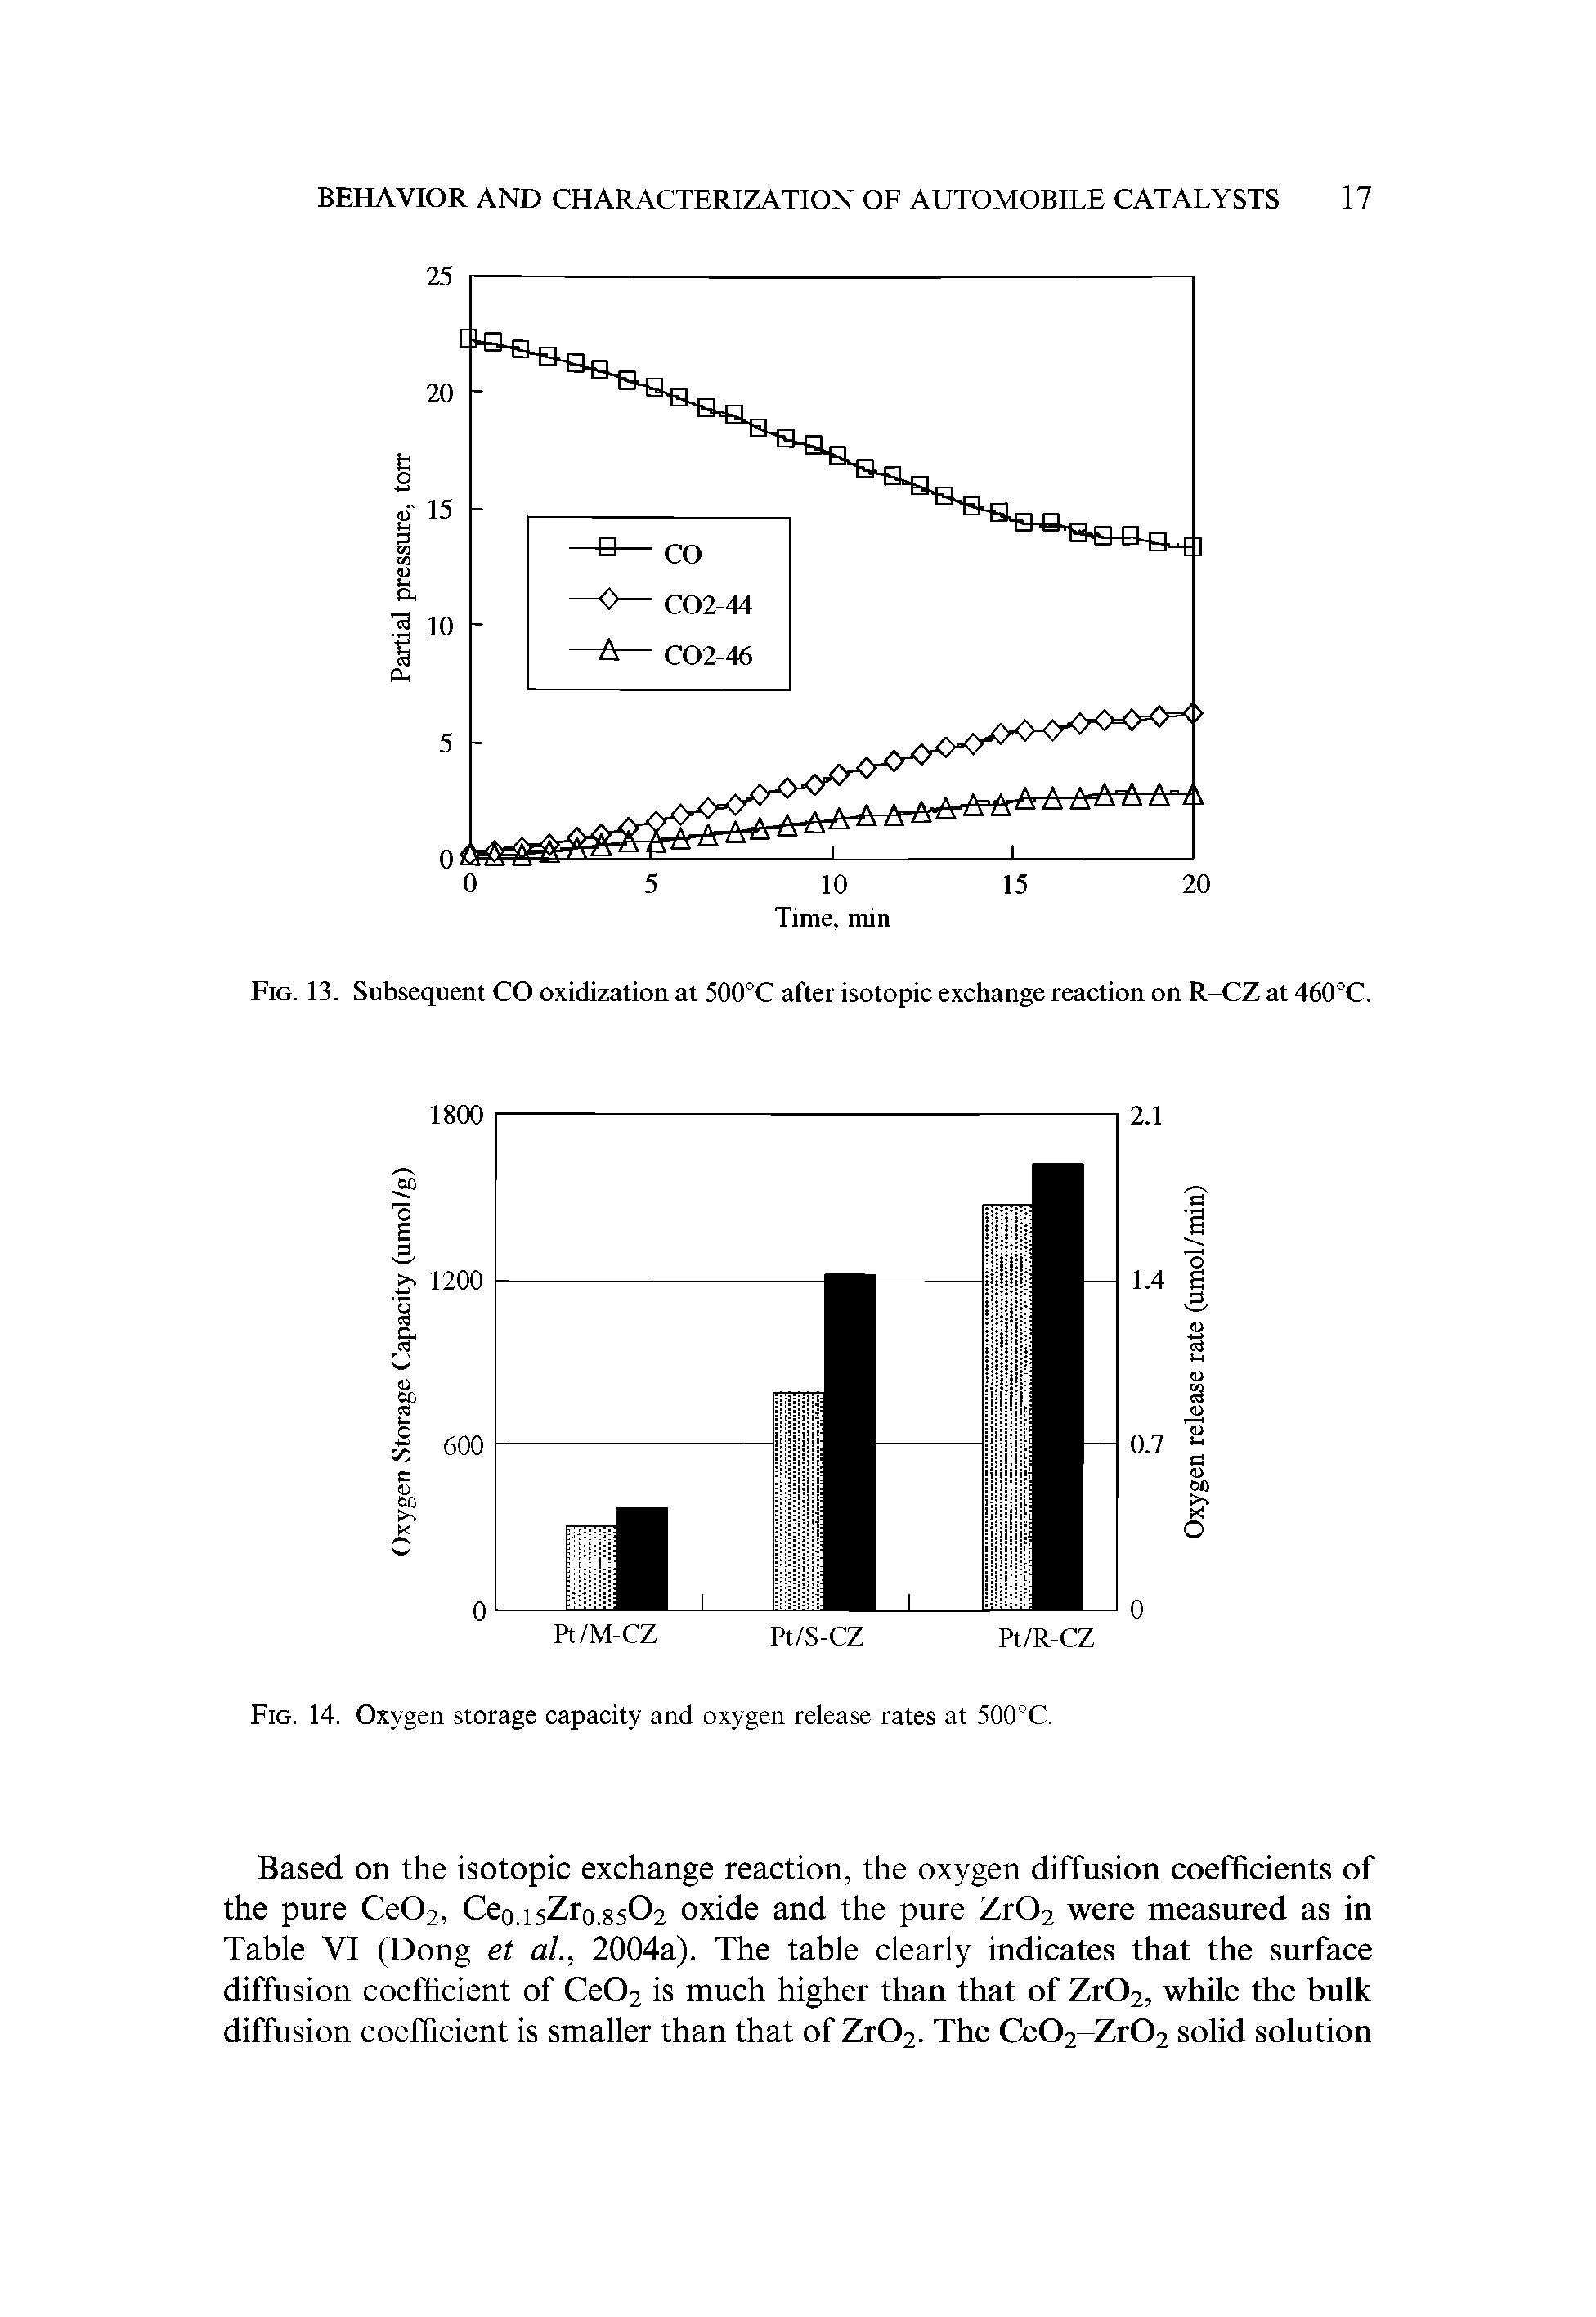 Fig. 14. Oxygen storage capacity and oxygen release rates at 500°C.